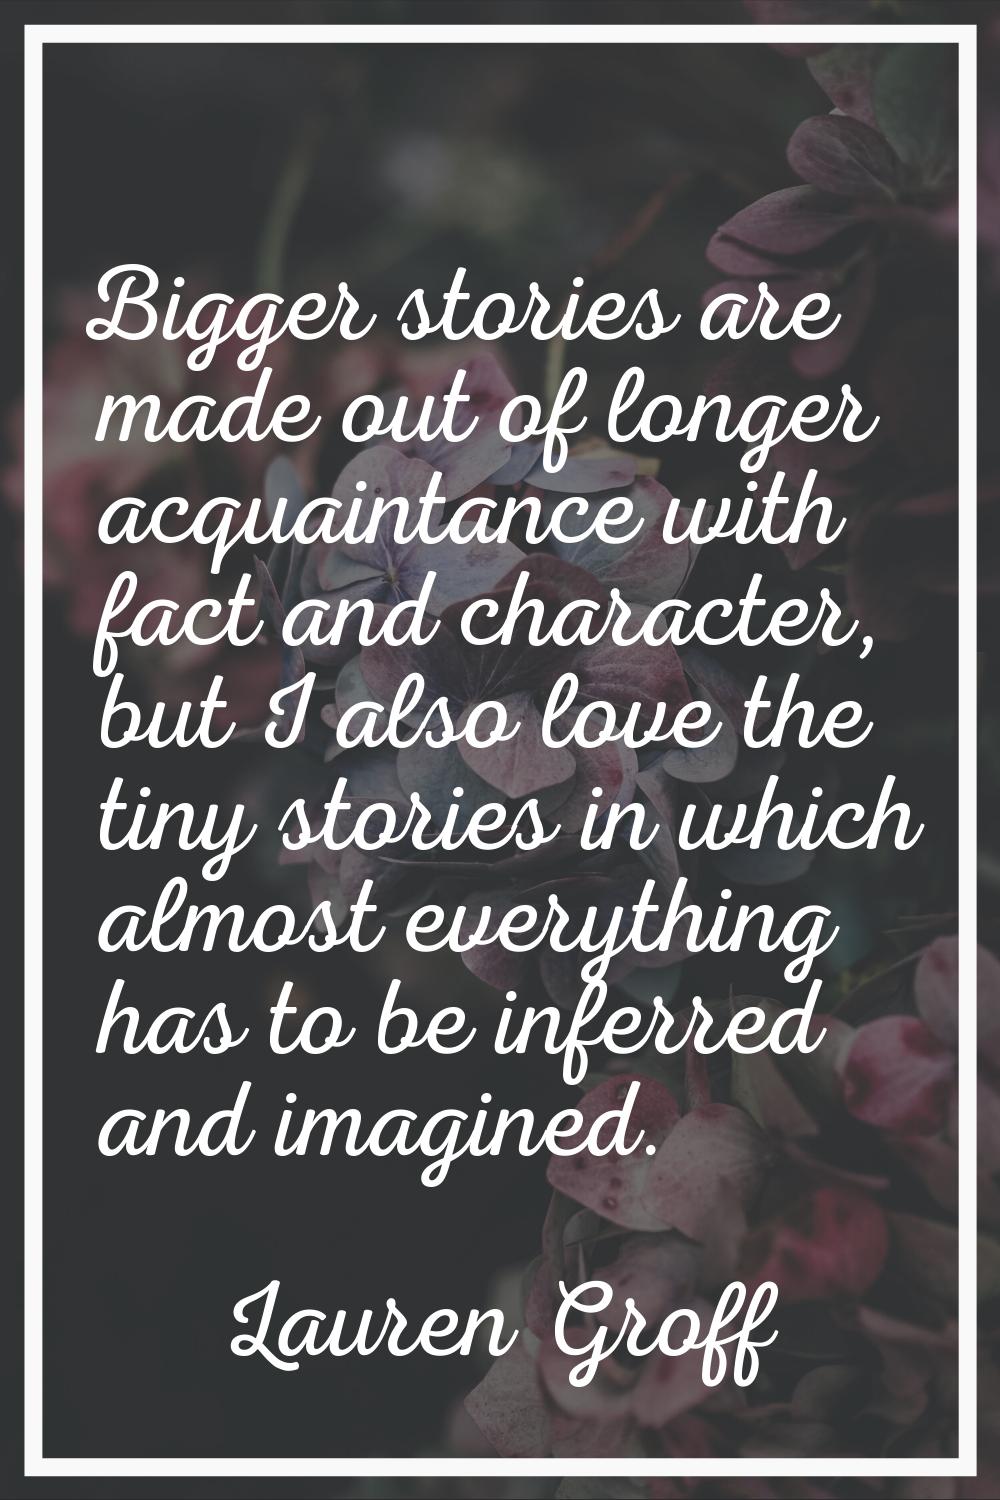 Bigger stories are made out of longer acquaintance with fact and character, but I also love the tin